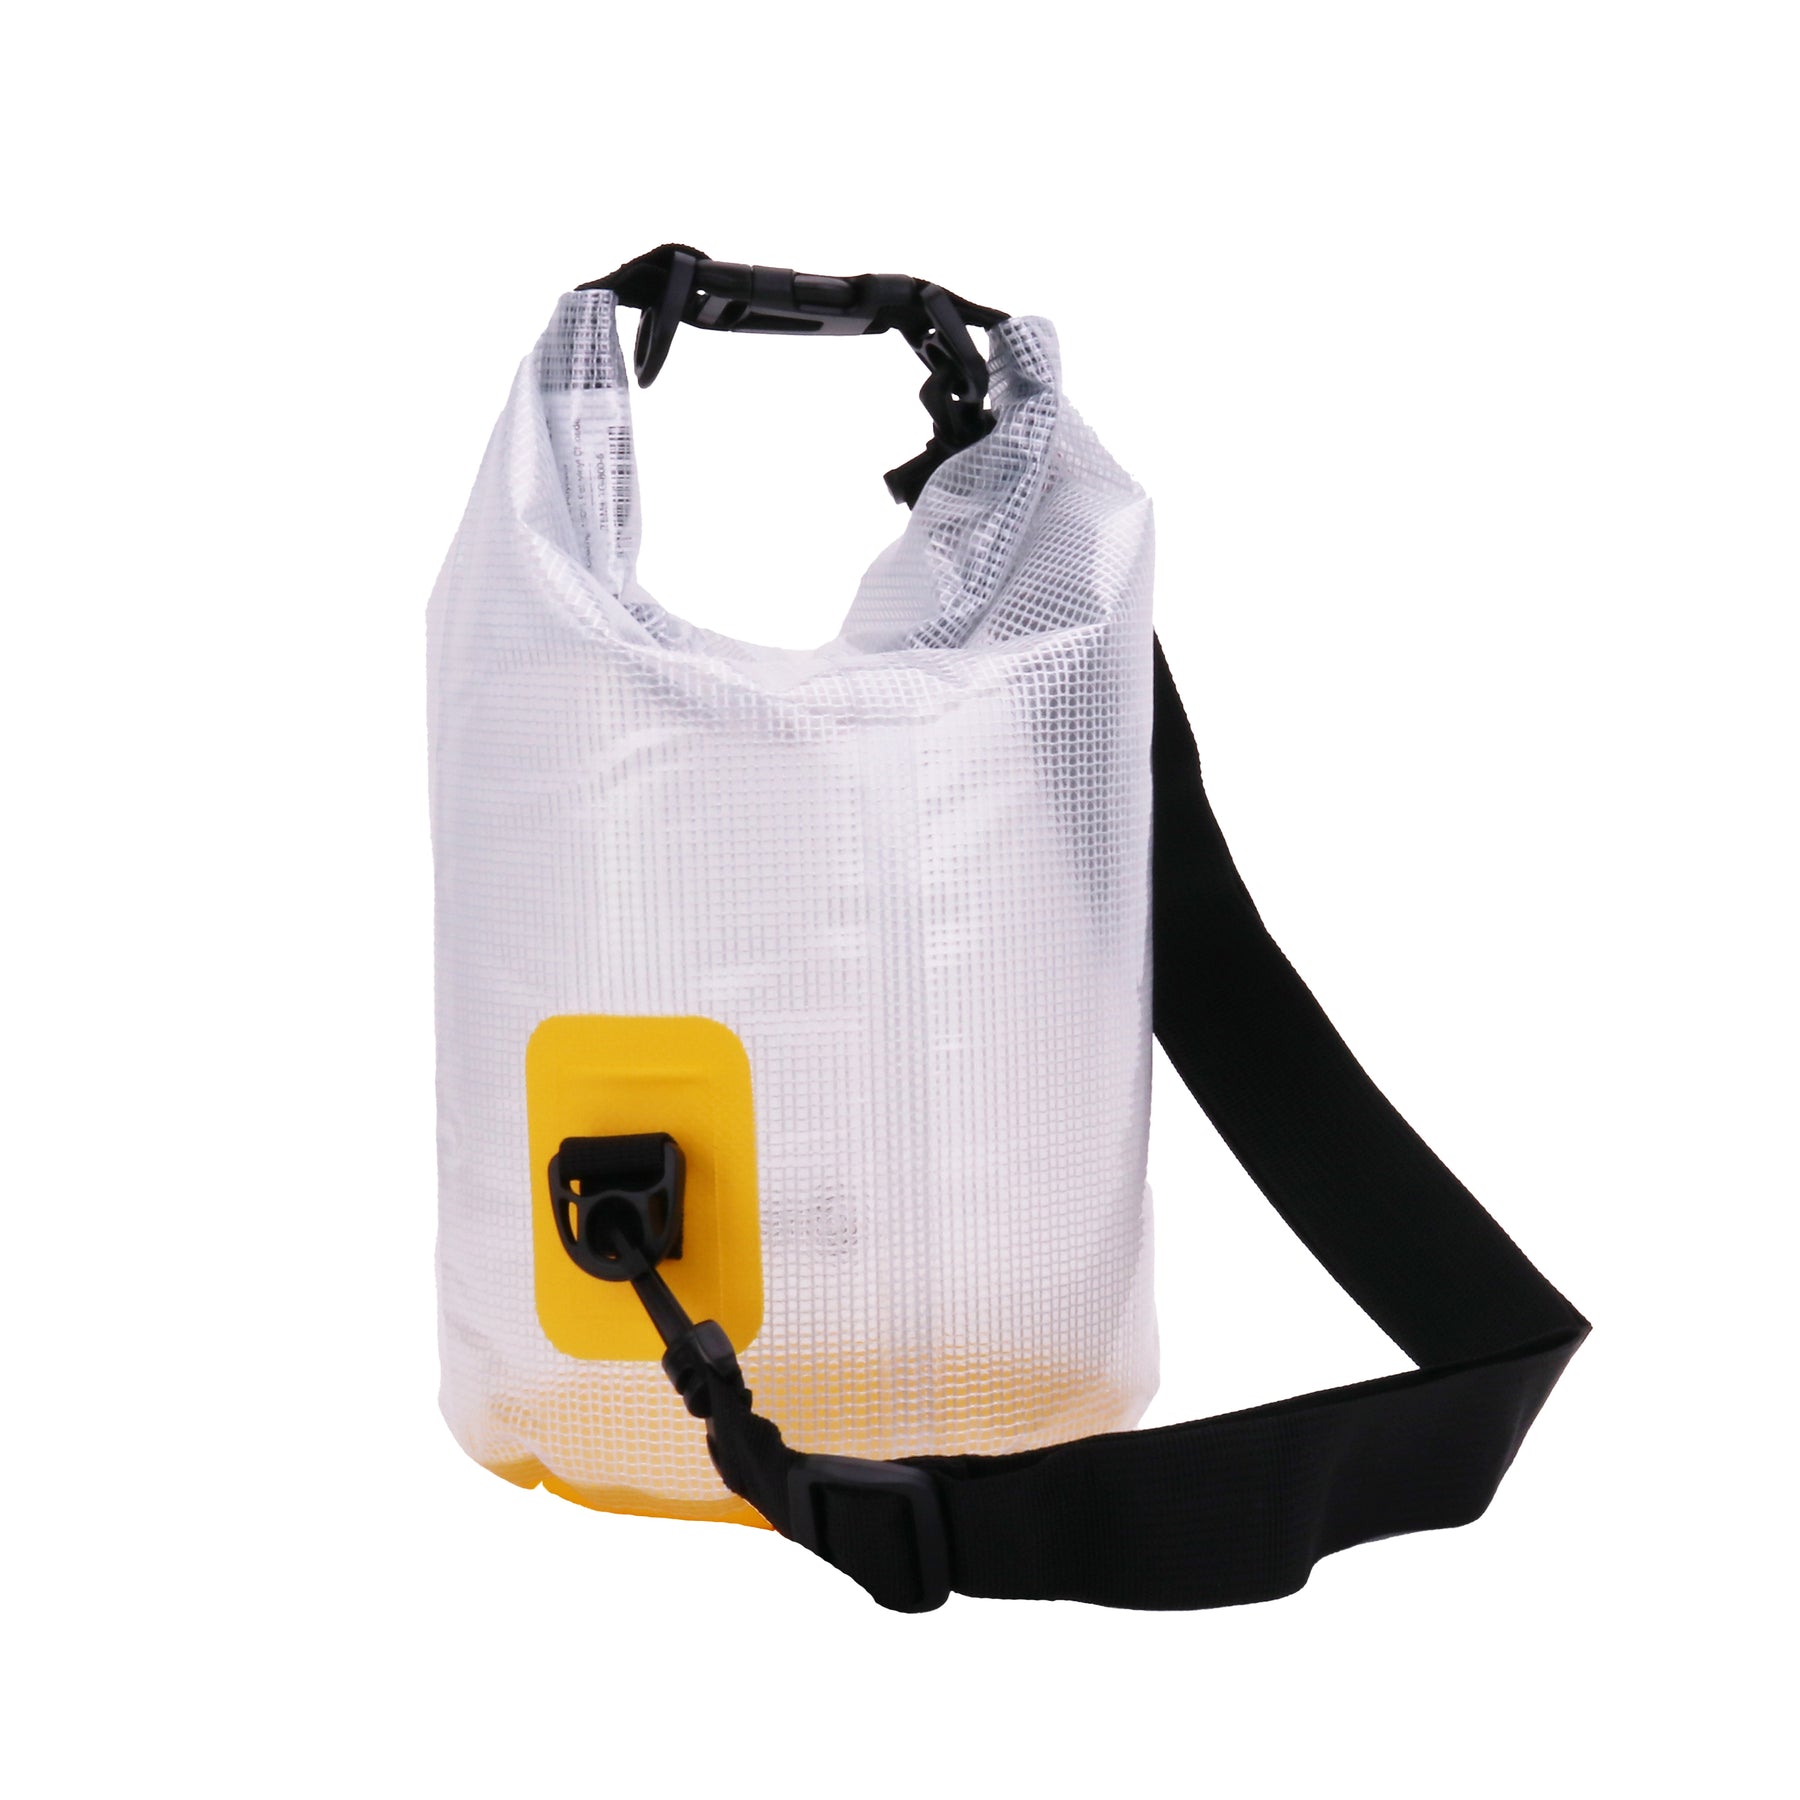 TrailGear 5 liter Heavy-Duty Transparent Dry Bag in the yellow variation.